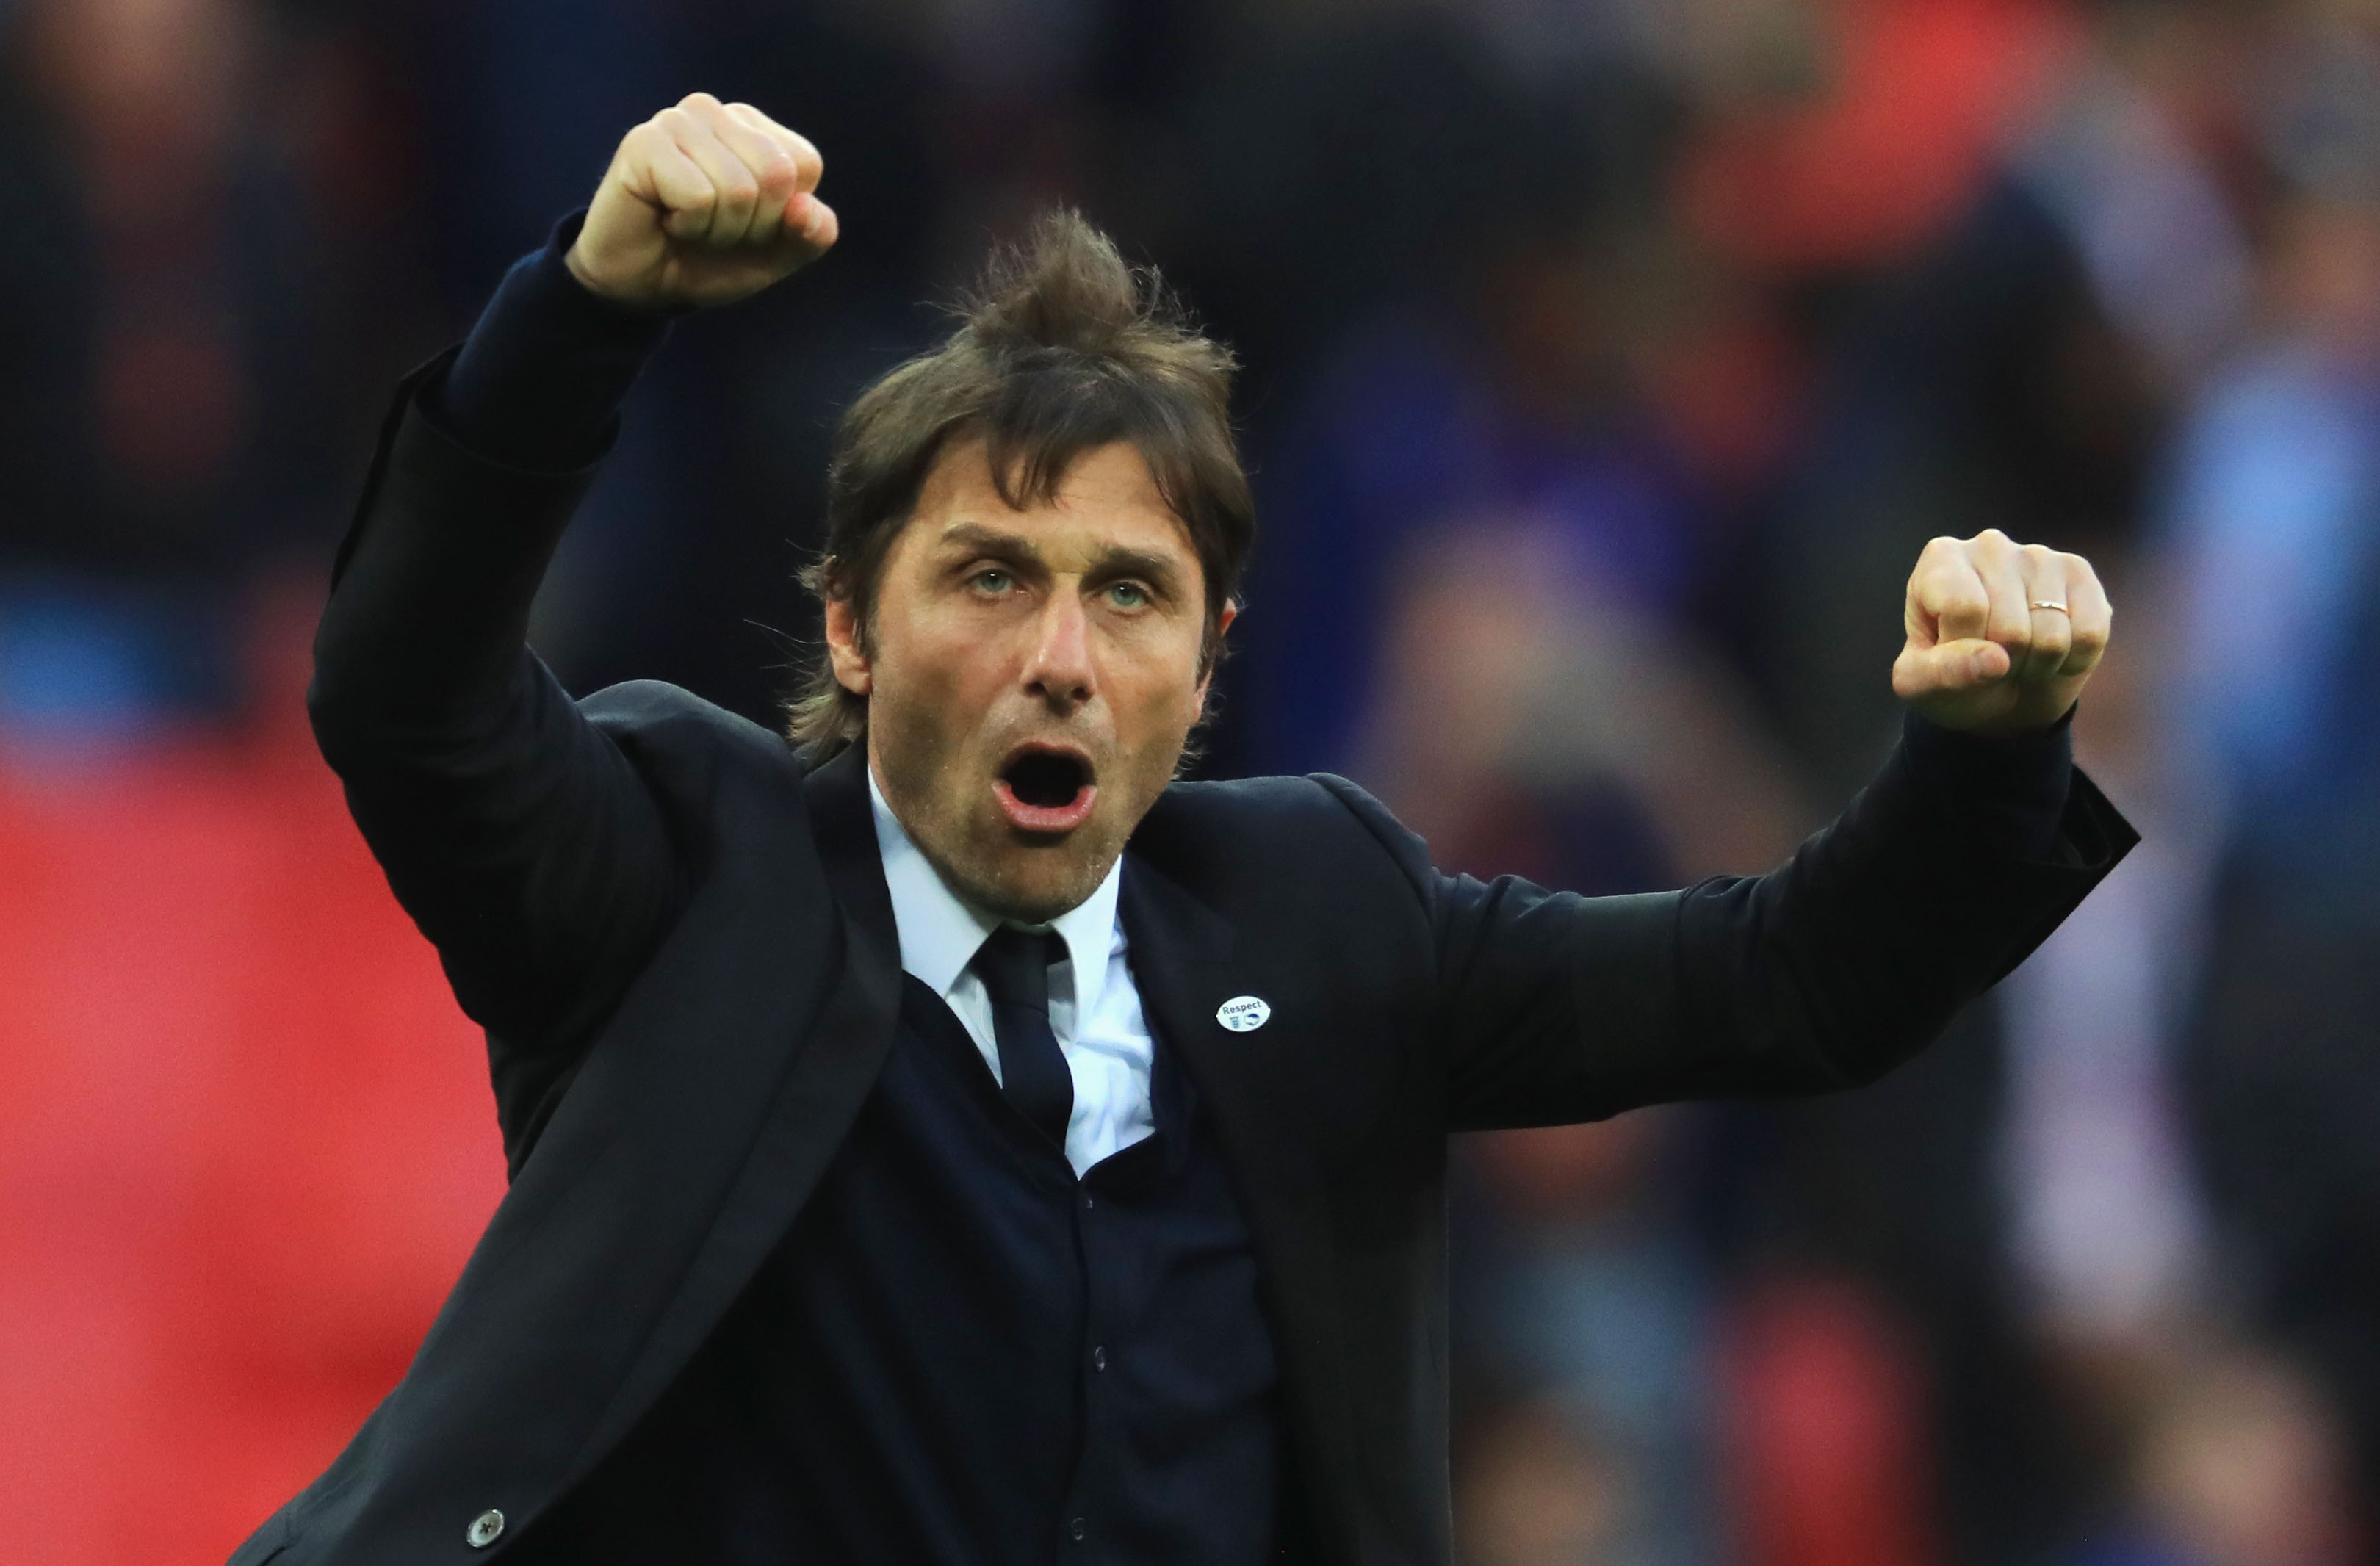 LONDON, ENGLAND - APRIL 22:  Antonio Conte, Manager of Chelsea celebrates after the full time whistle in  The Emirates FA Cup Semi-Final between Chelsea and Tottenham Hotspur at Wembley Stadium on April 22, 2017 in London, England.  (Photo by Richard Heathcote/Getty Images)